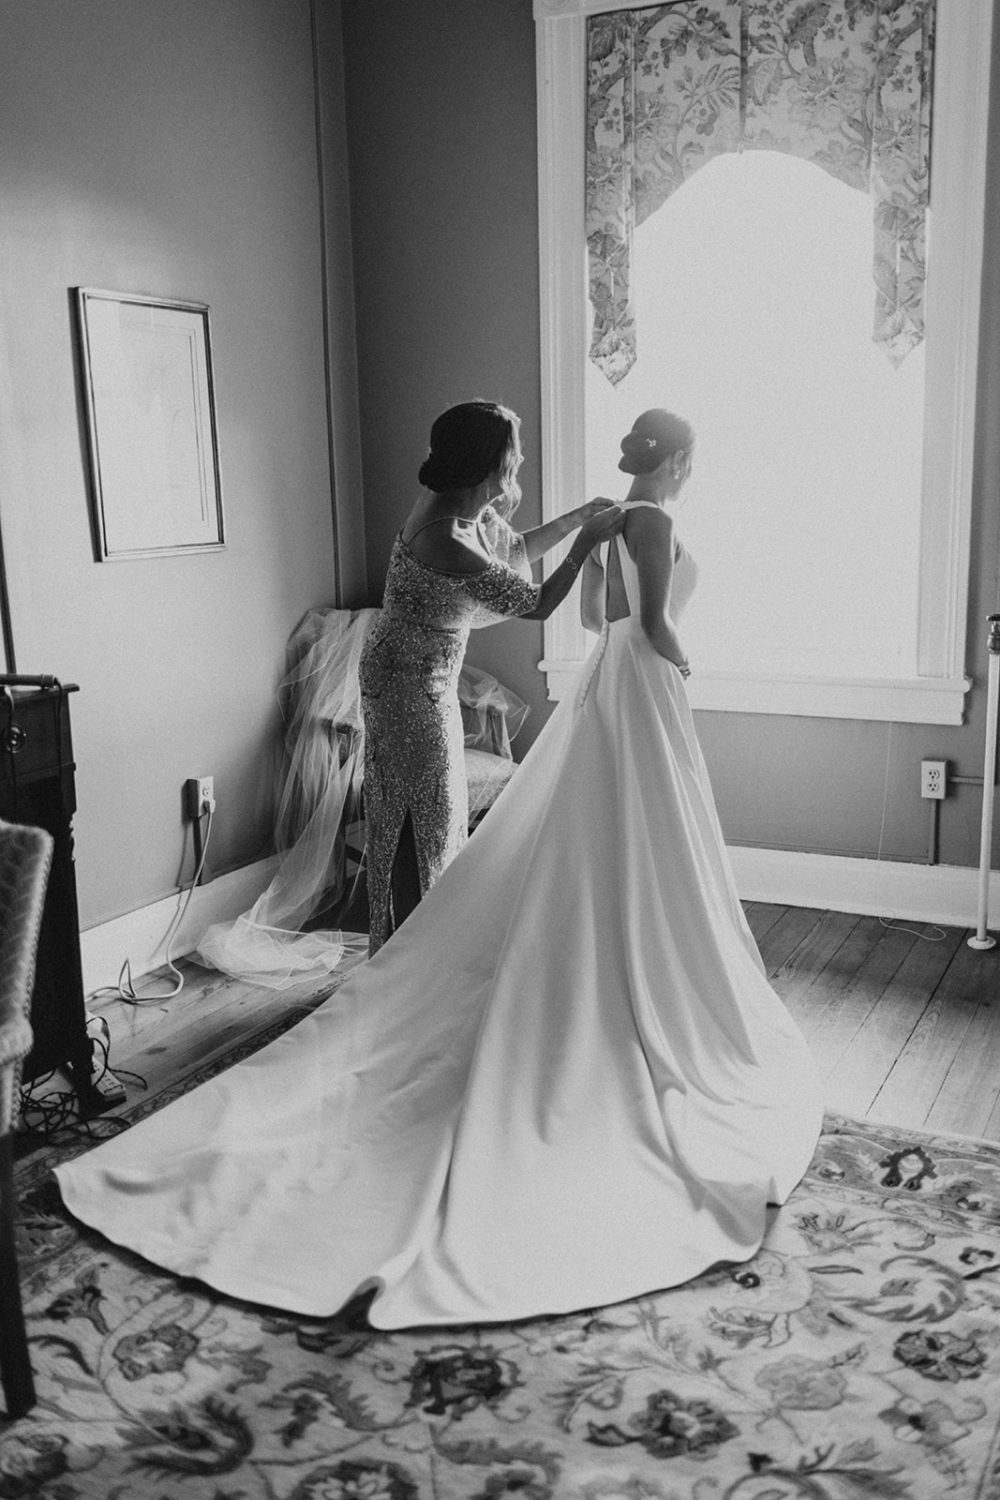 mom buttons up the back of bride's white wedding dress